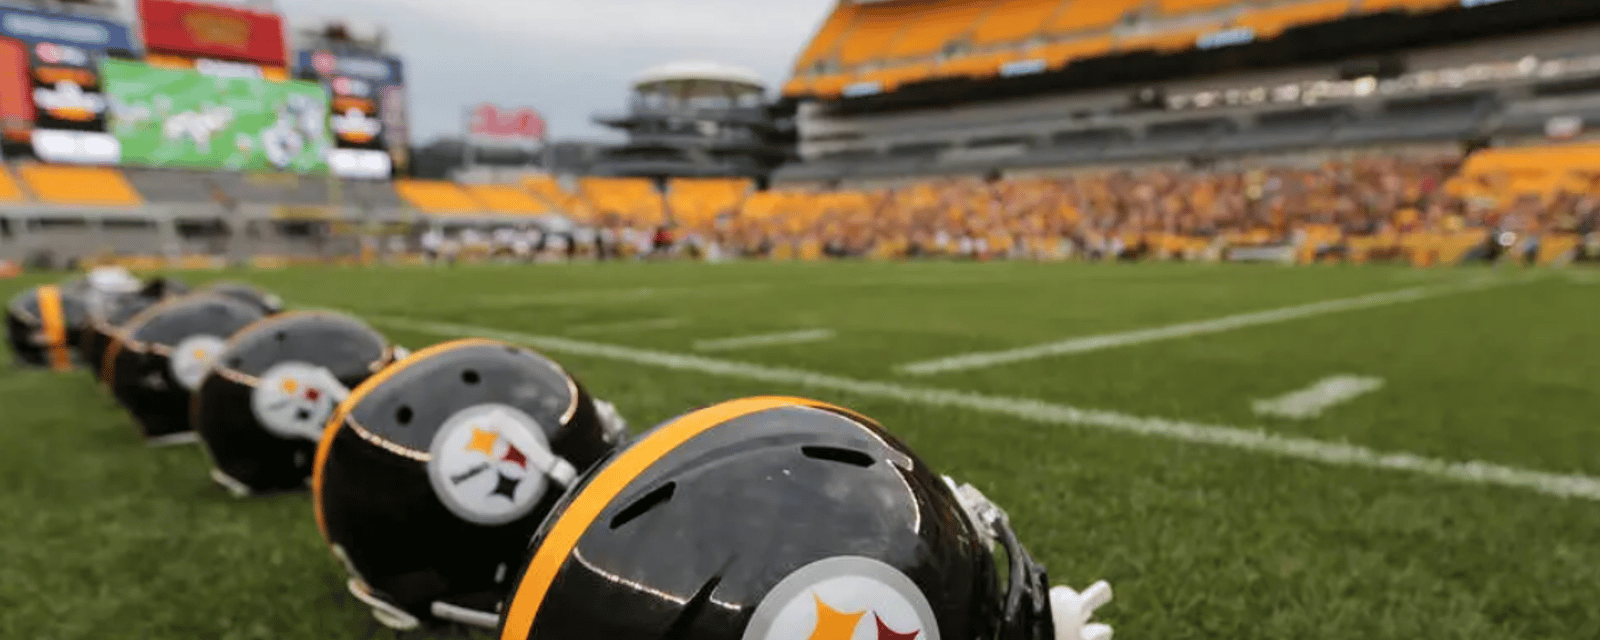 Extended Steelers family suffers tragedy